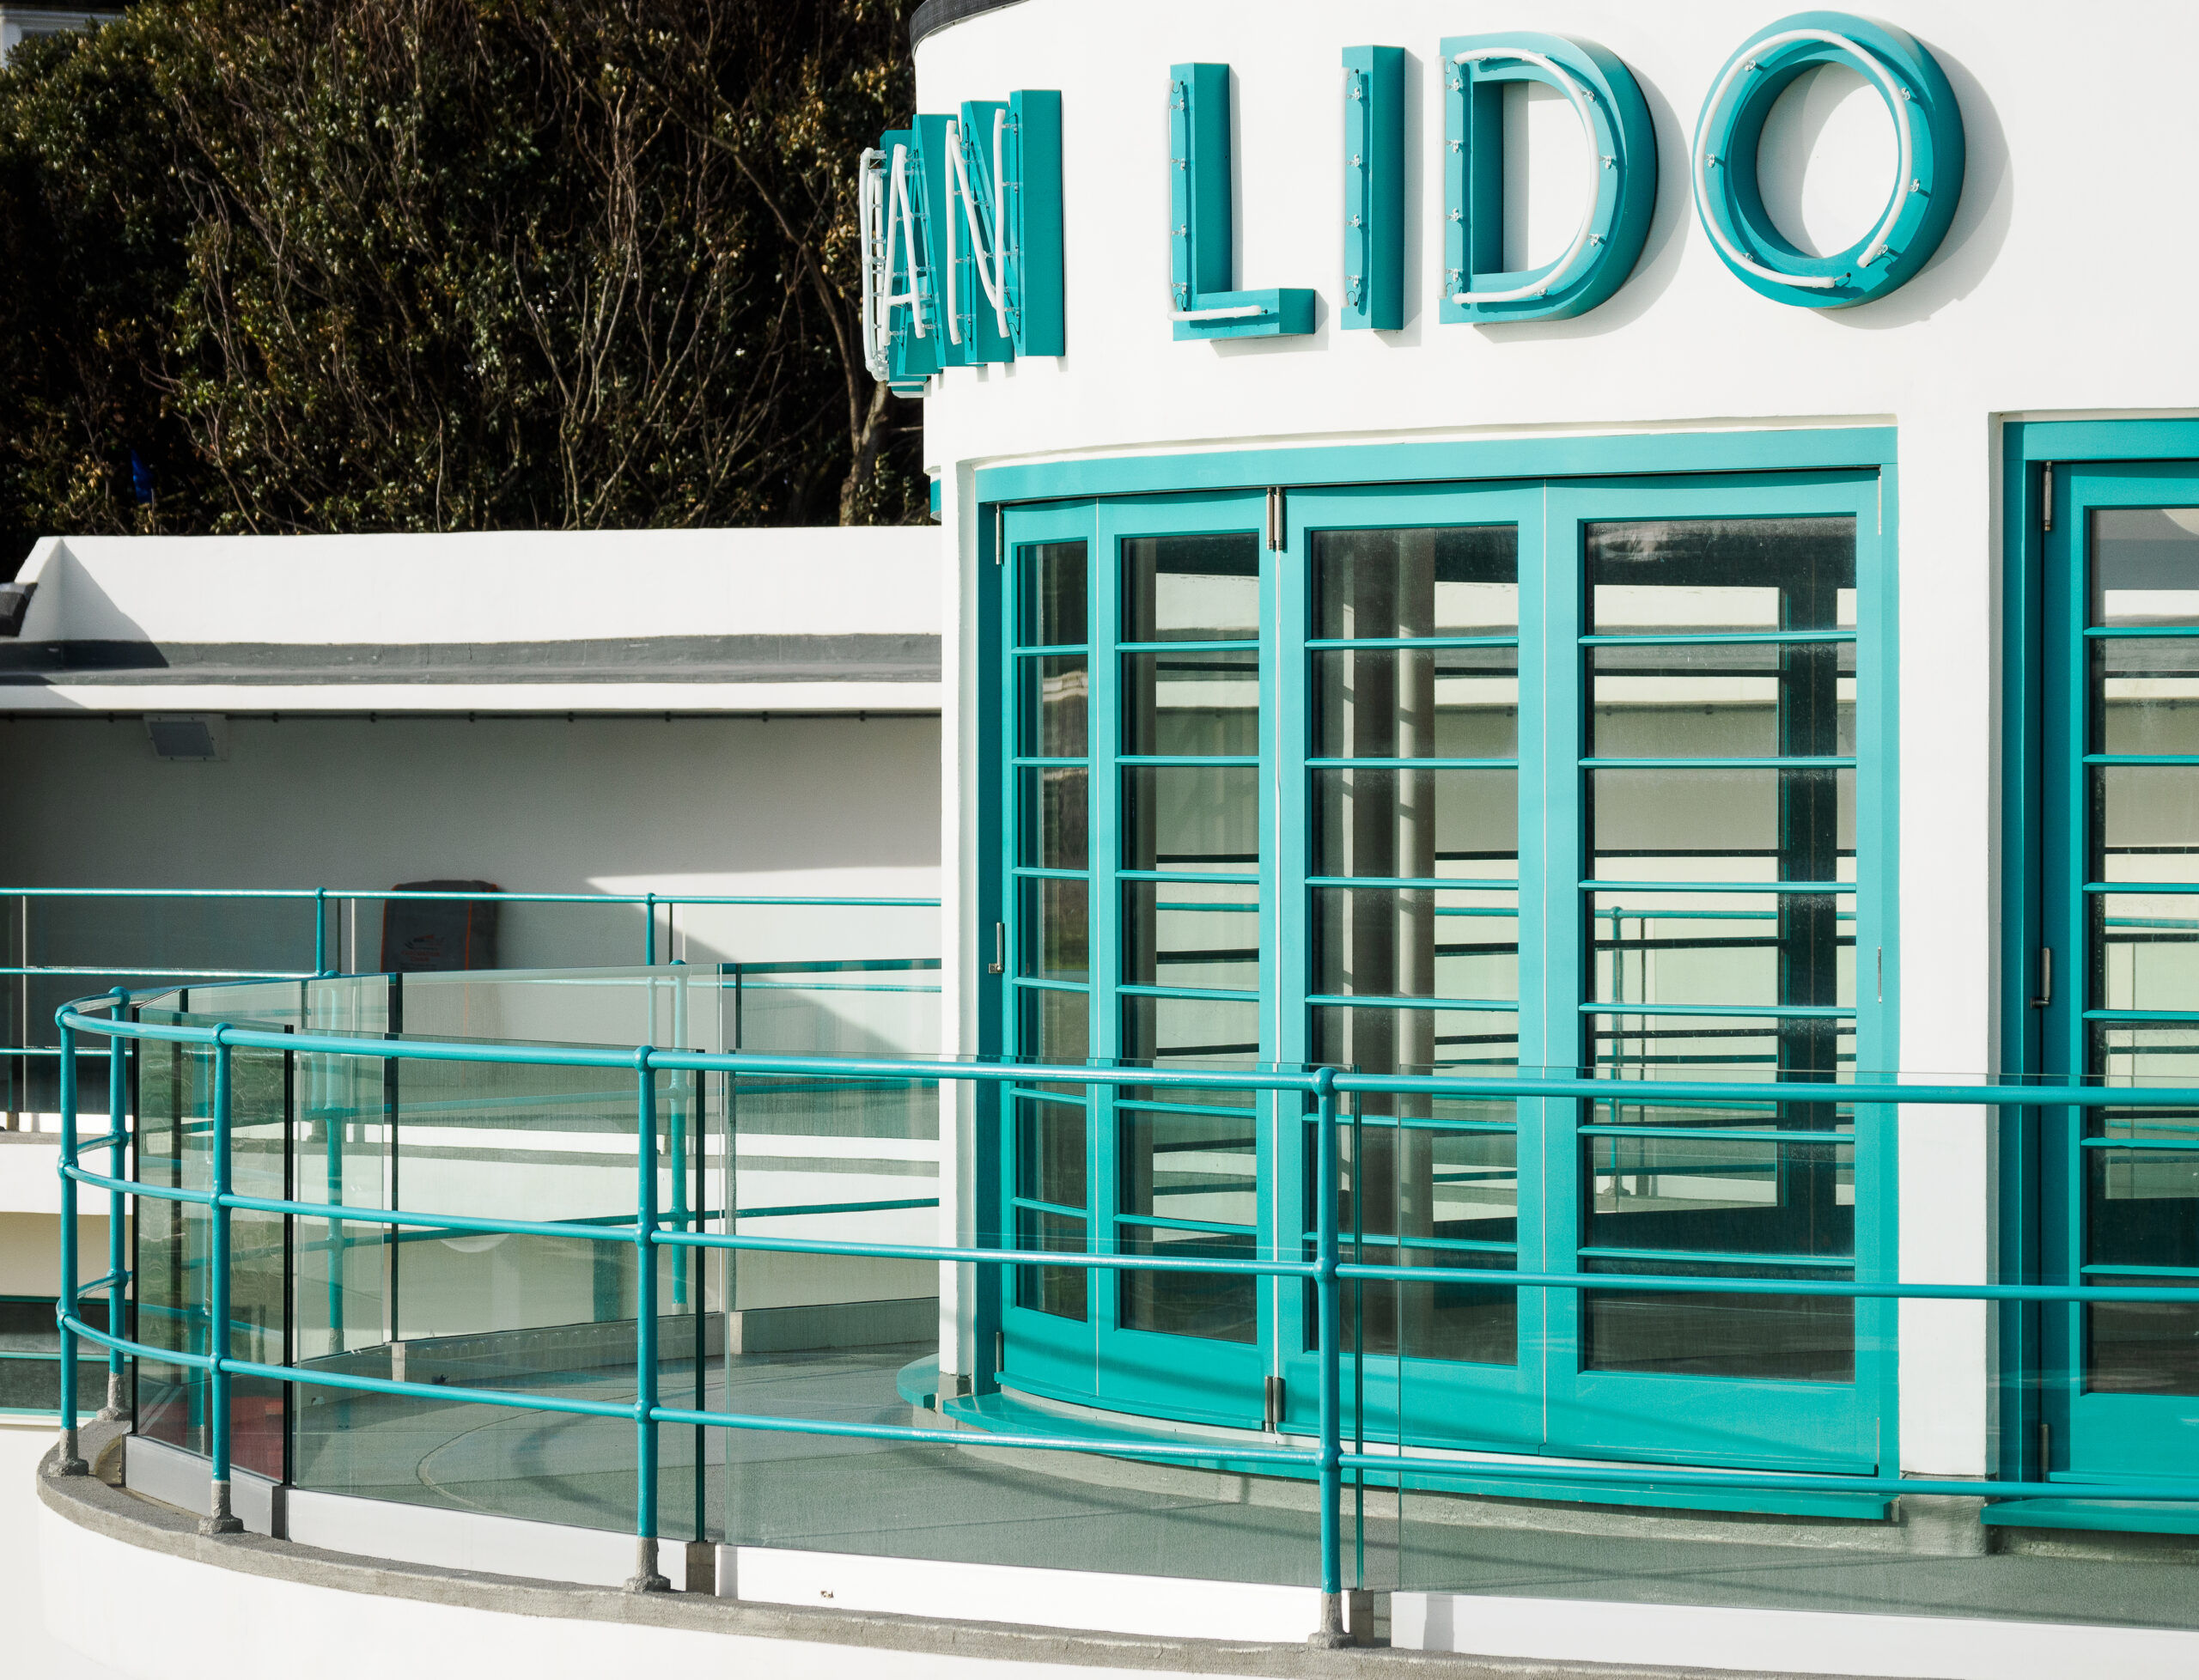 The Saltdean Lido first floor which will be home to the new Deco restaurant. Pictured, a curved building with white and light blue facade. With railings. 